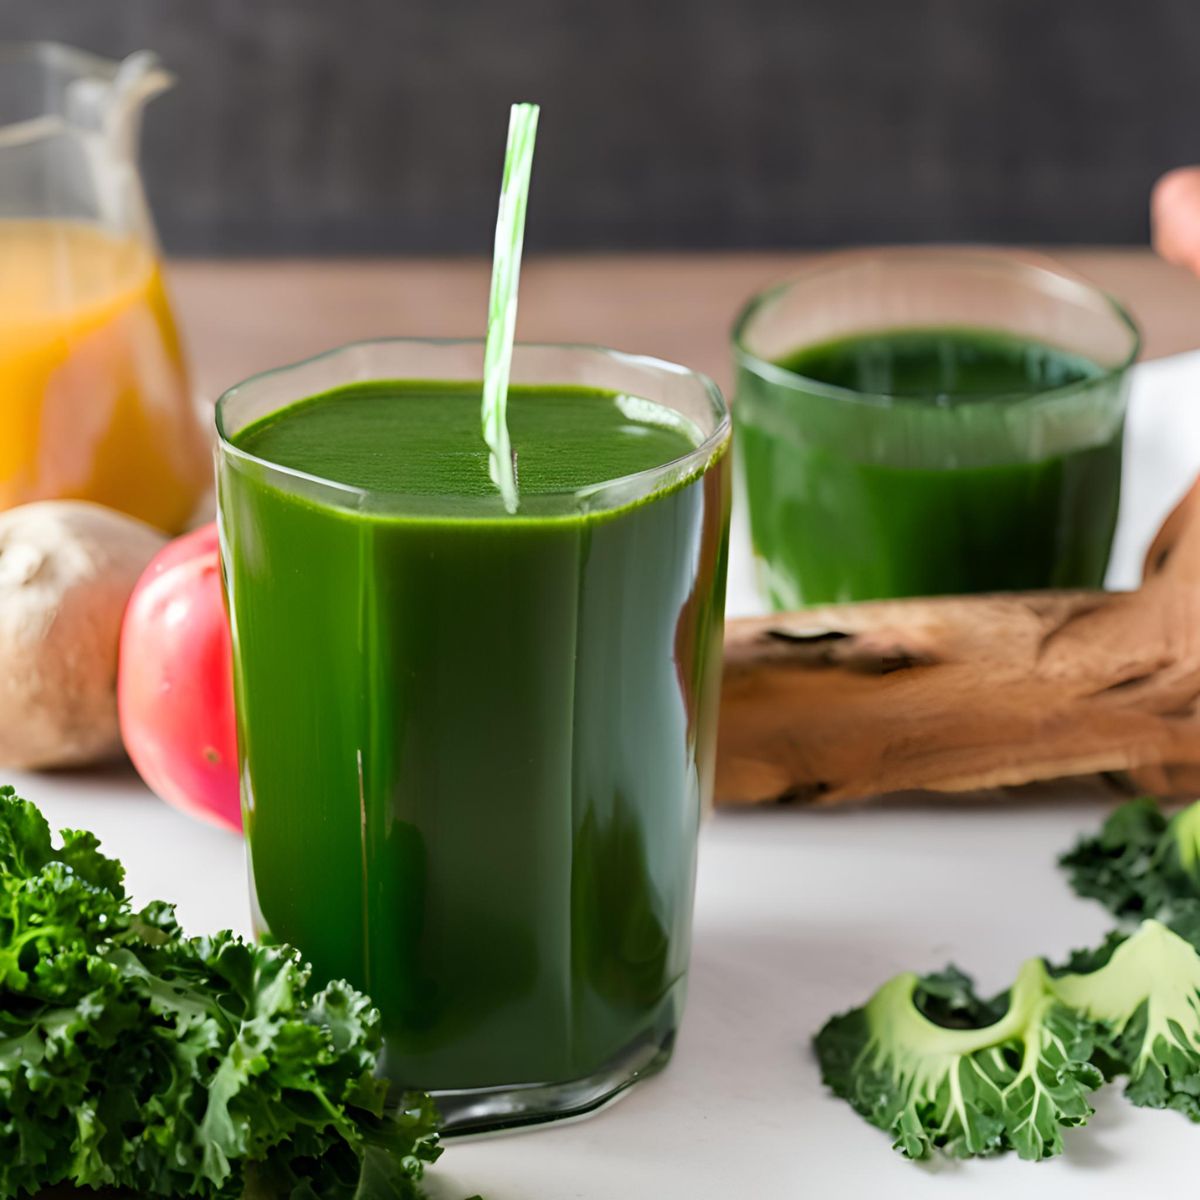 Kale Juice Recipe: A Nutritious and Refreshing Drink!